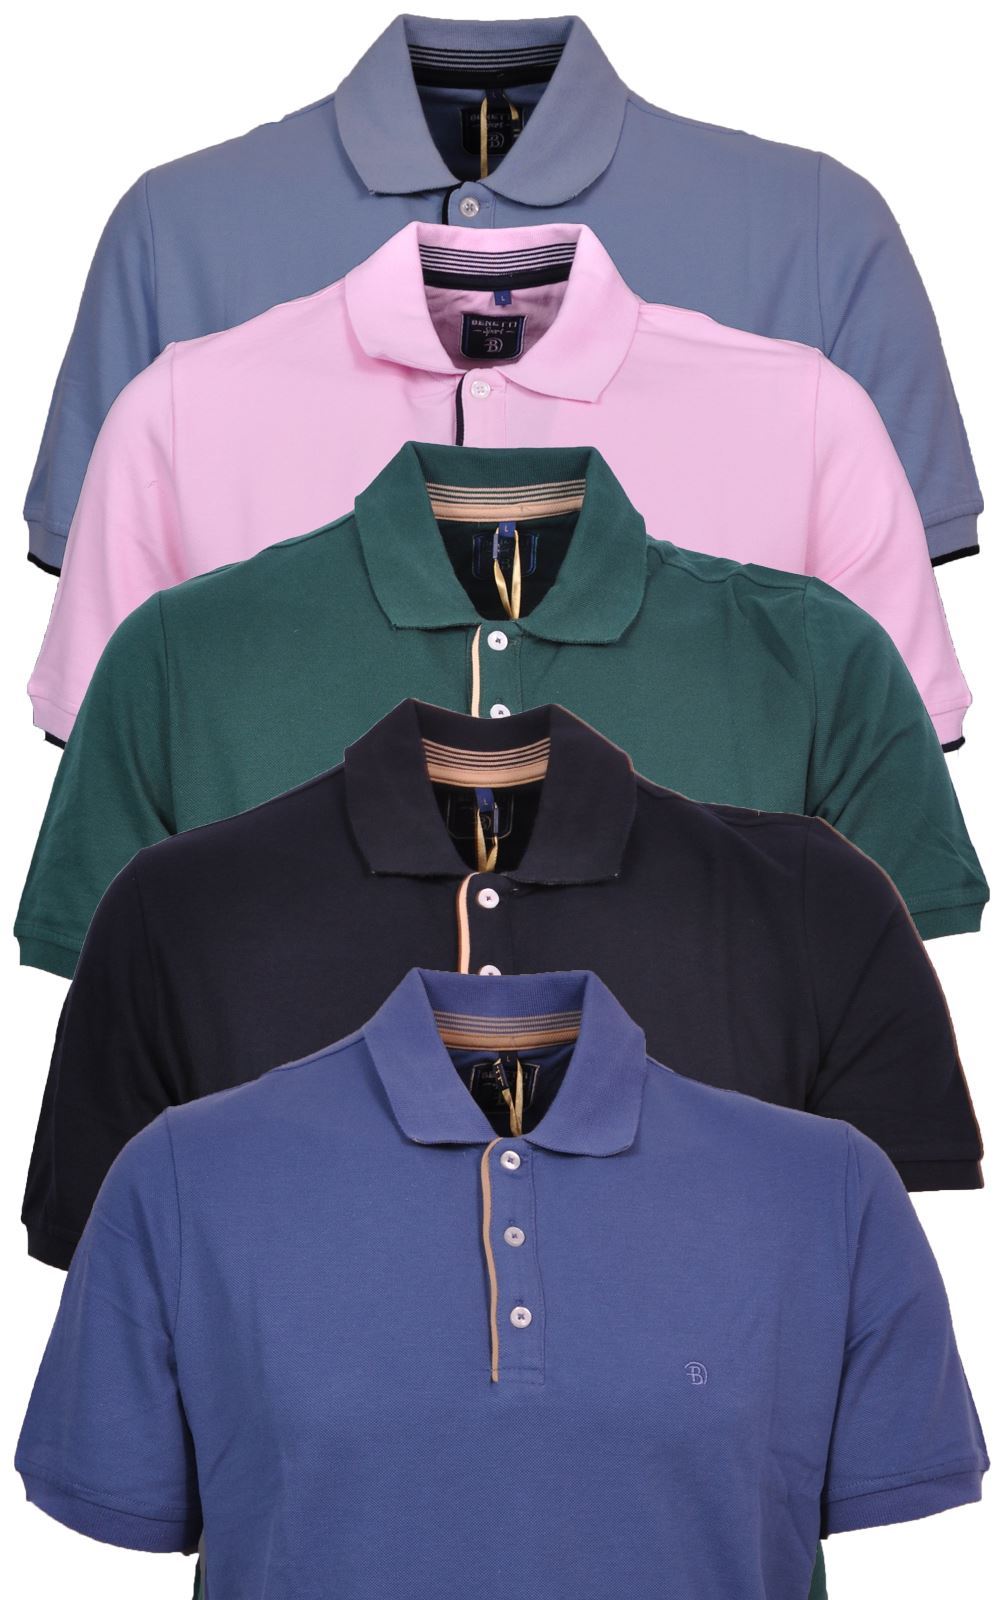 Picture of Benetti Polo Shirt Danny